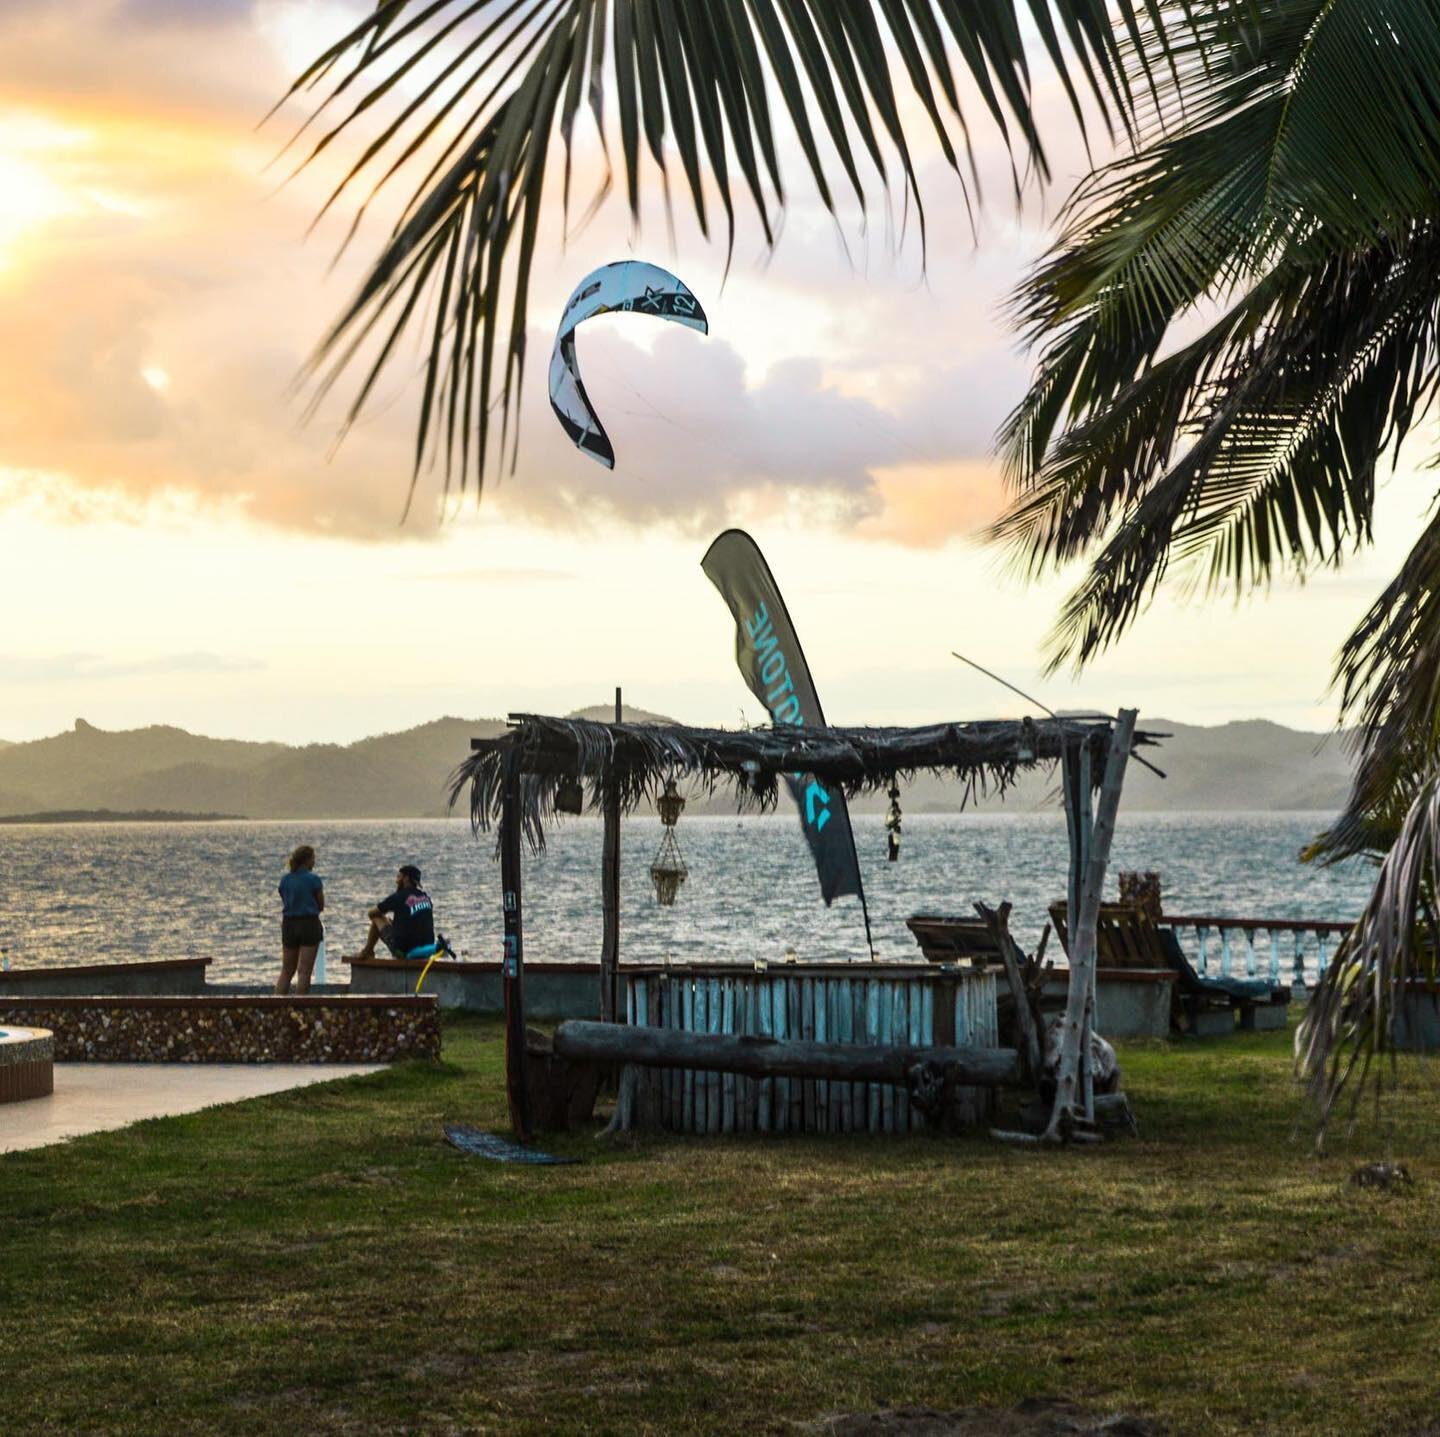 Panama Kitesurfing Guesthouse

Open from: 1st December - April

New this year: specialized coaching weeks by Brendan. 
Join us for a Beginner, Progression or Foil Kitecamp or just stay with us anytime for some amazing kitesurfing and adventure packed